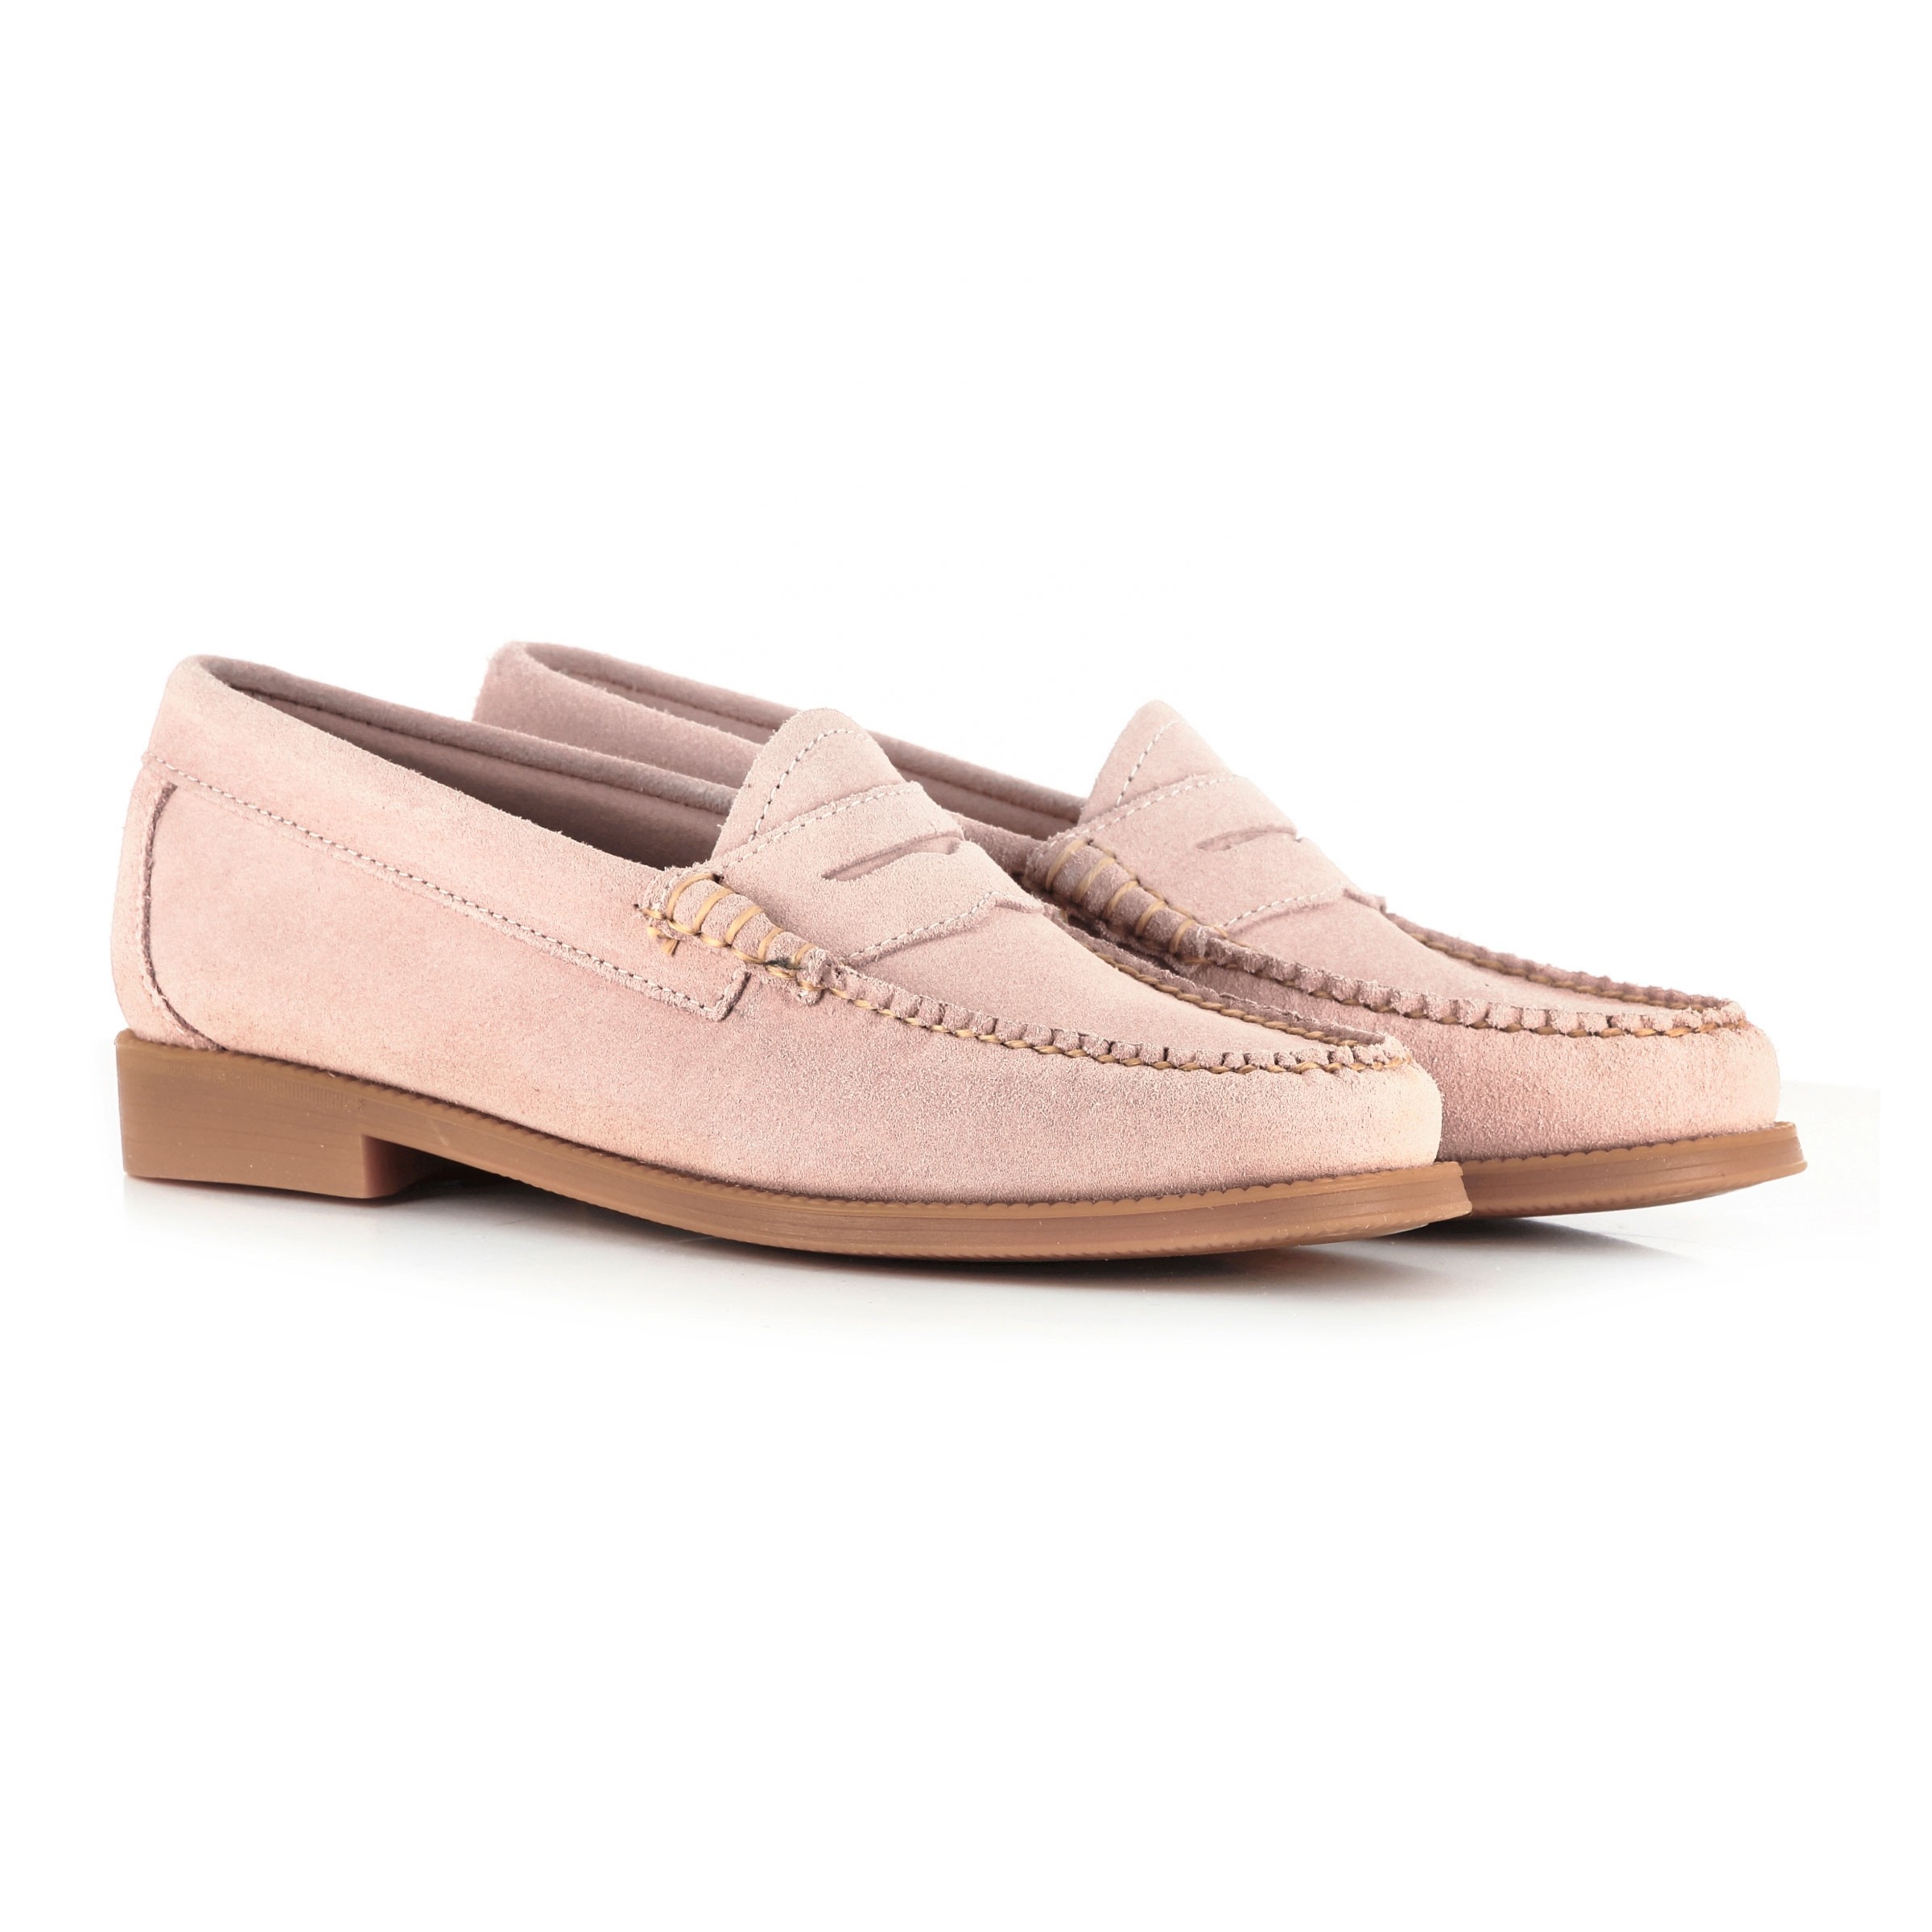 Gh Bass Weejun Wmn Penny Loafers Pink